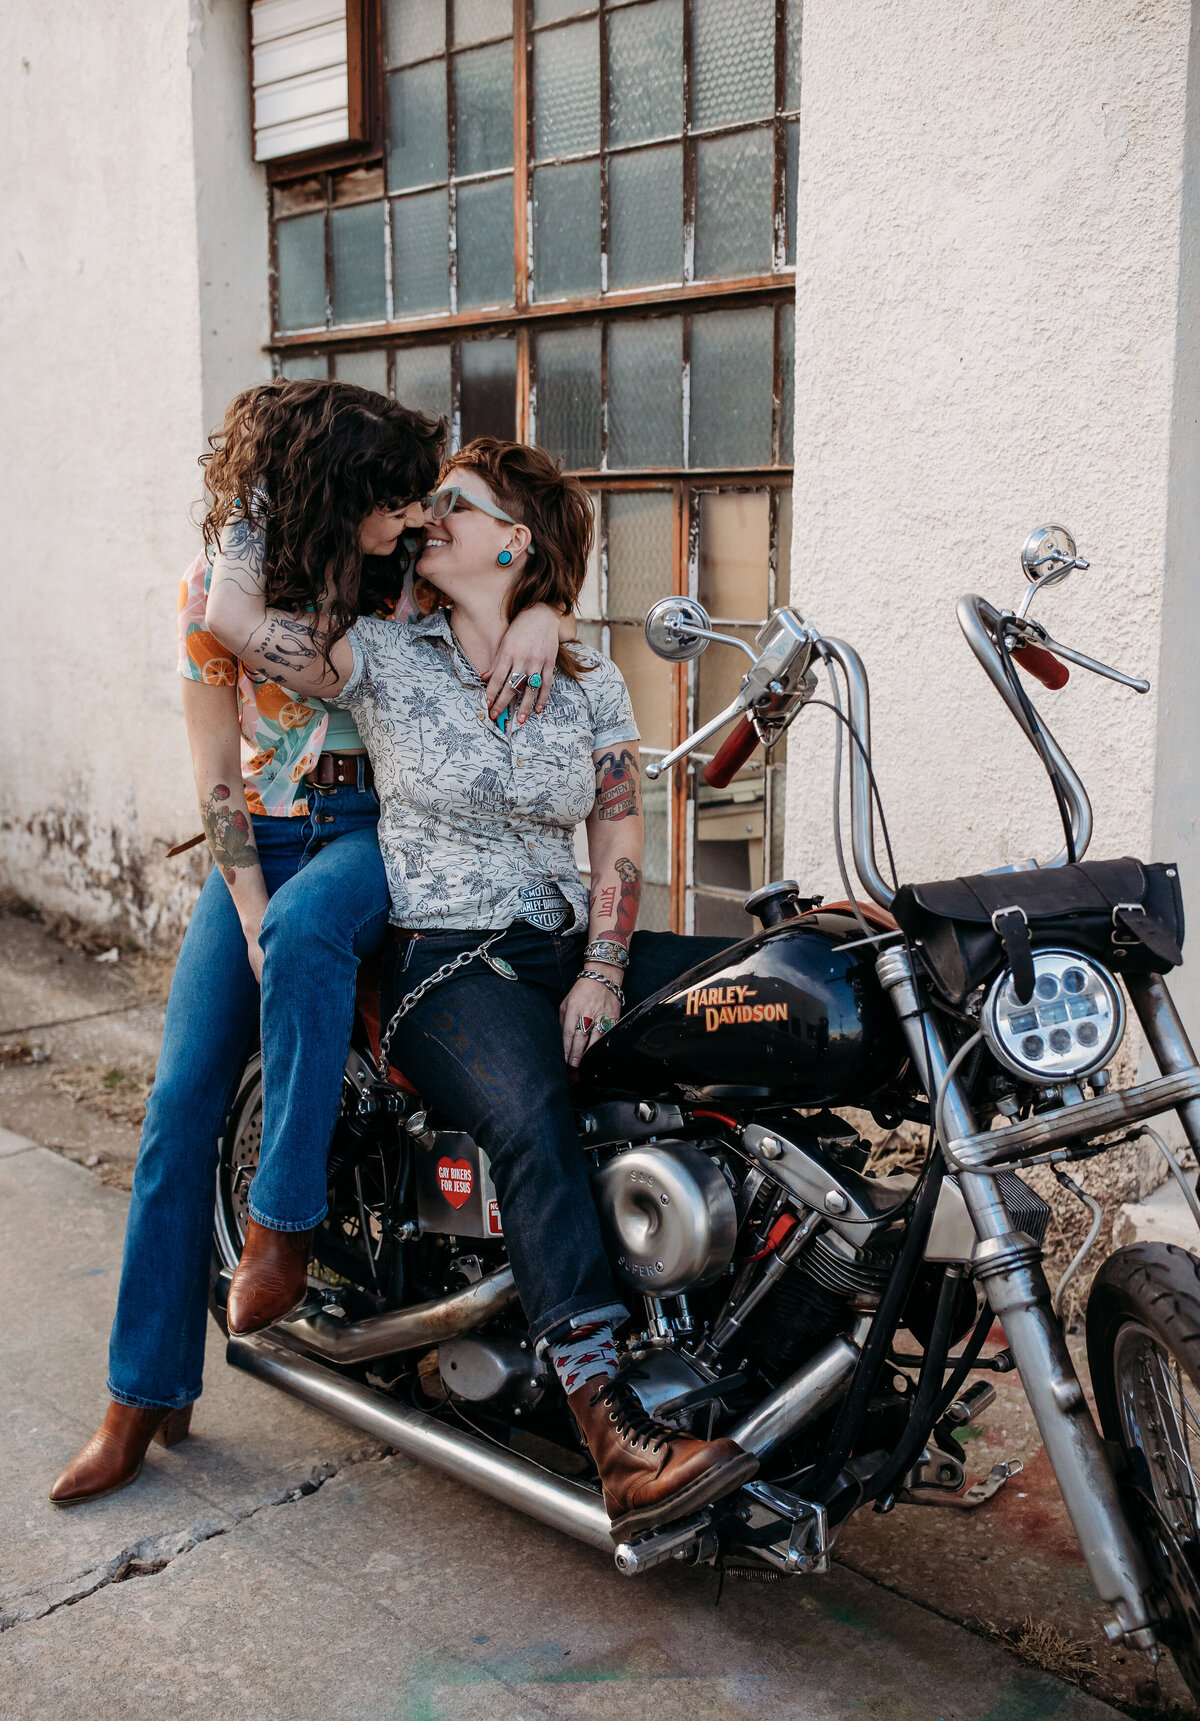 A couple seated on a motorcycle, sharing a kiss